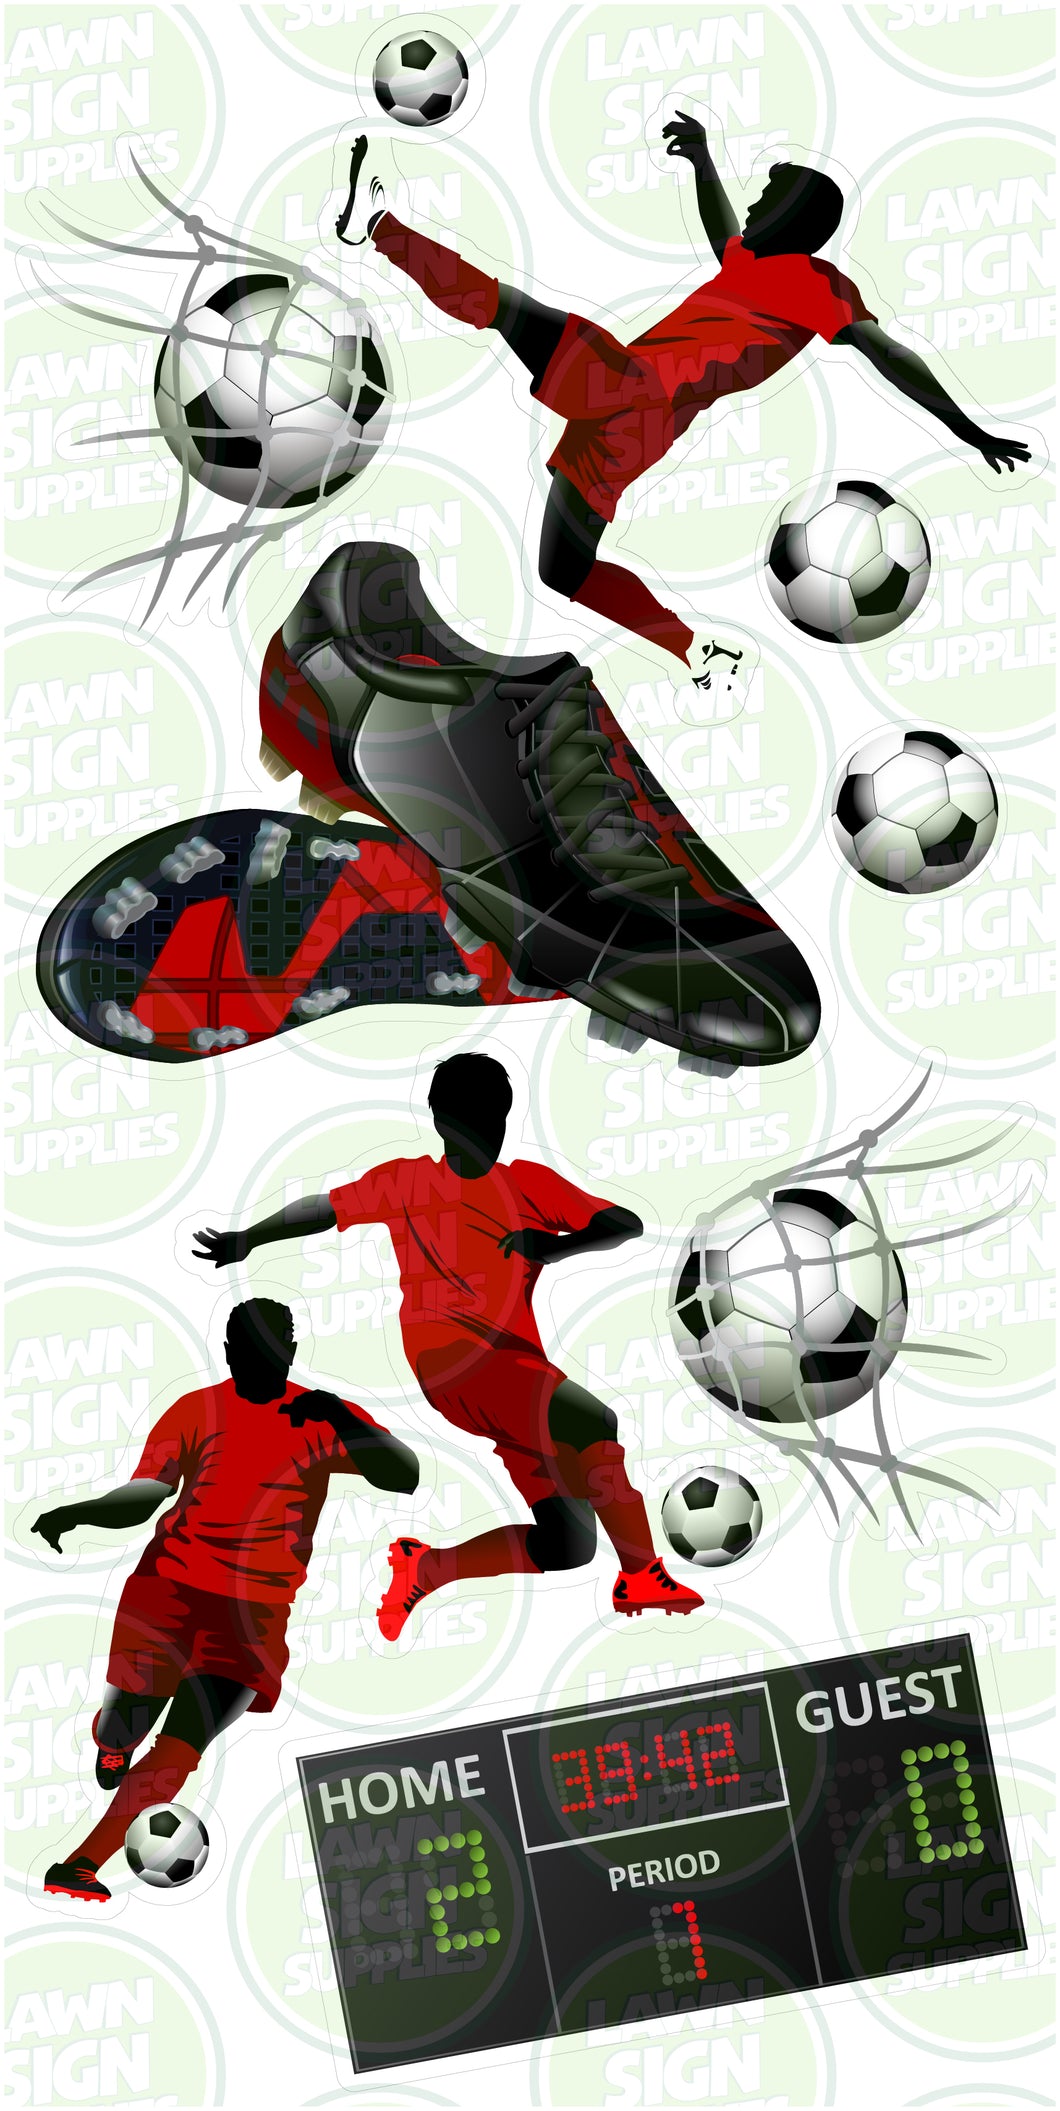 SOCCER SILHOUETTES